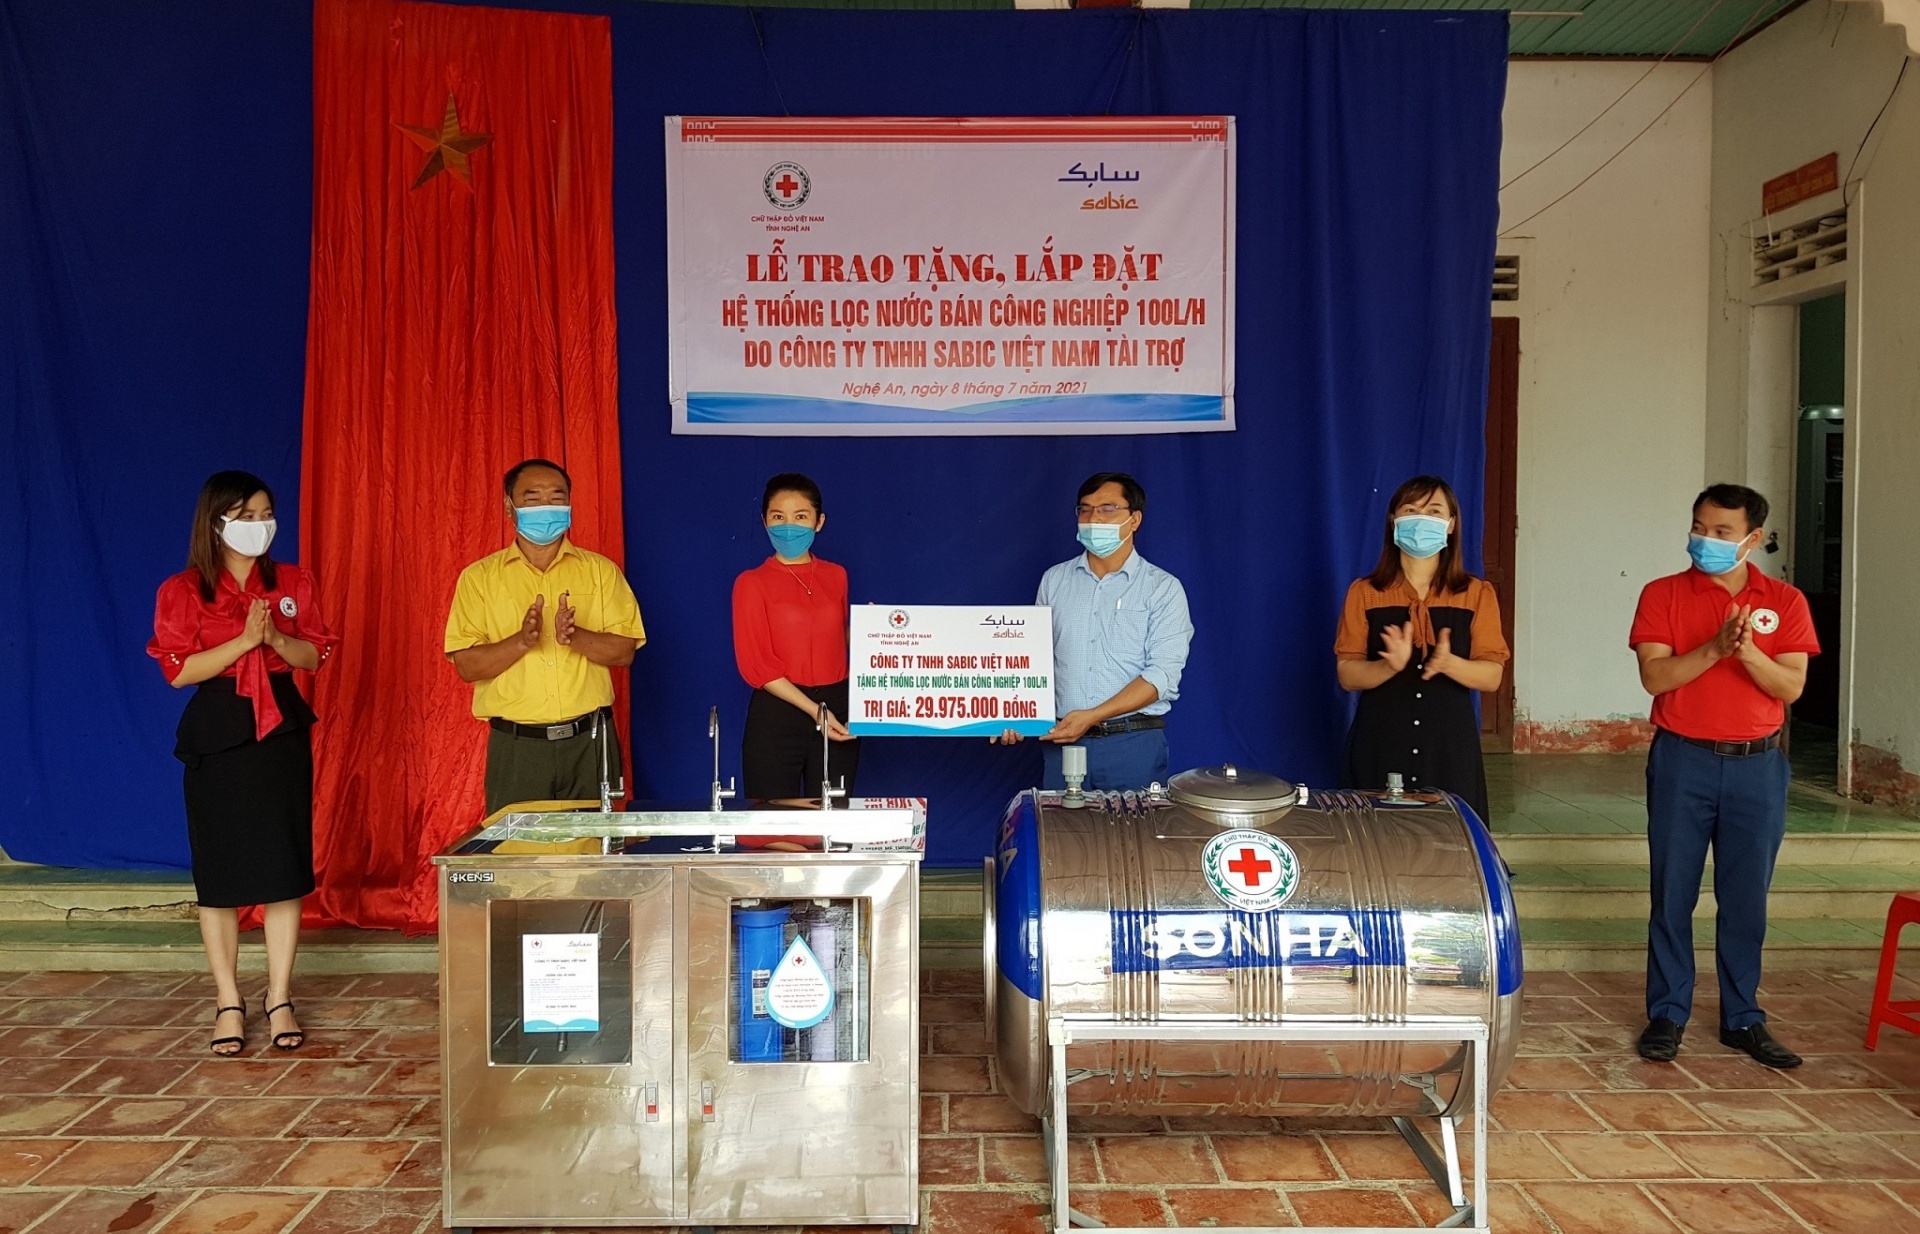 SABIC supports Vietnamese communities with long-term access to safe drinking